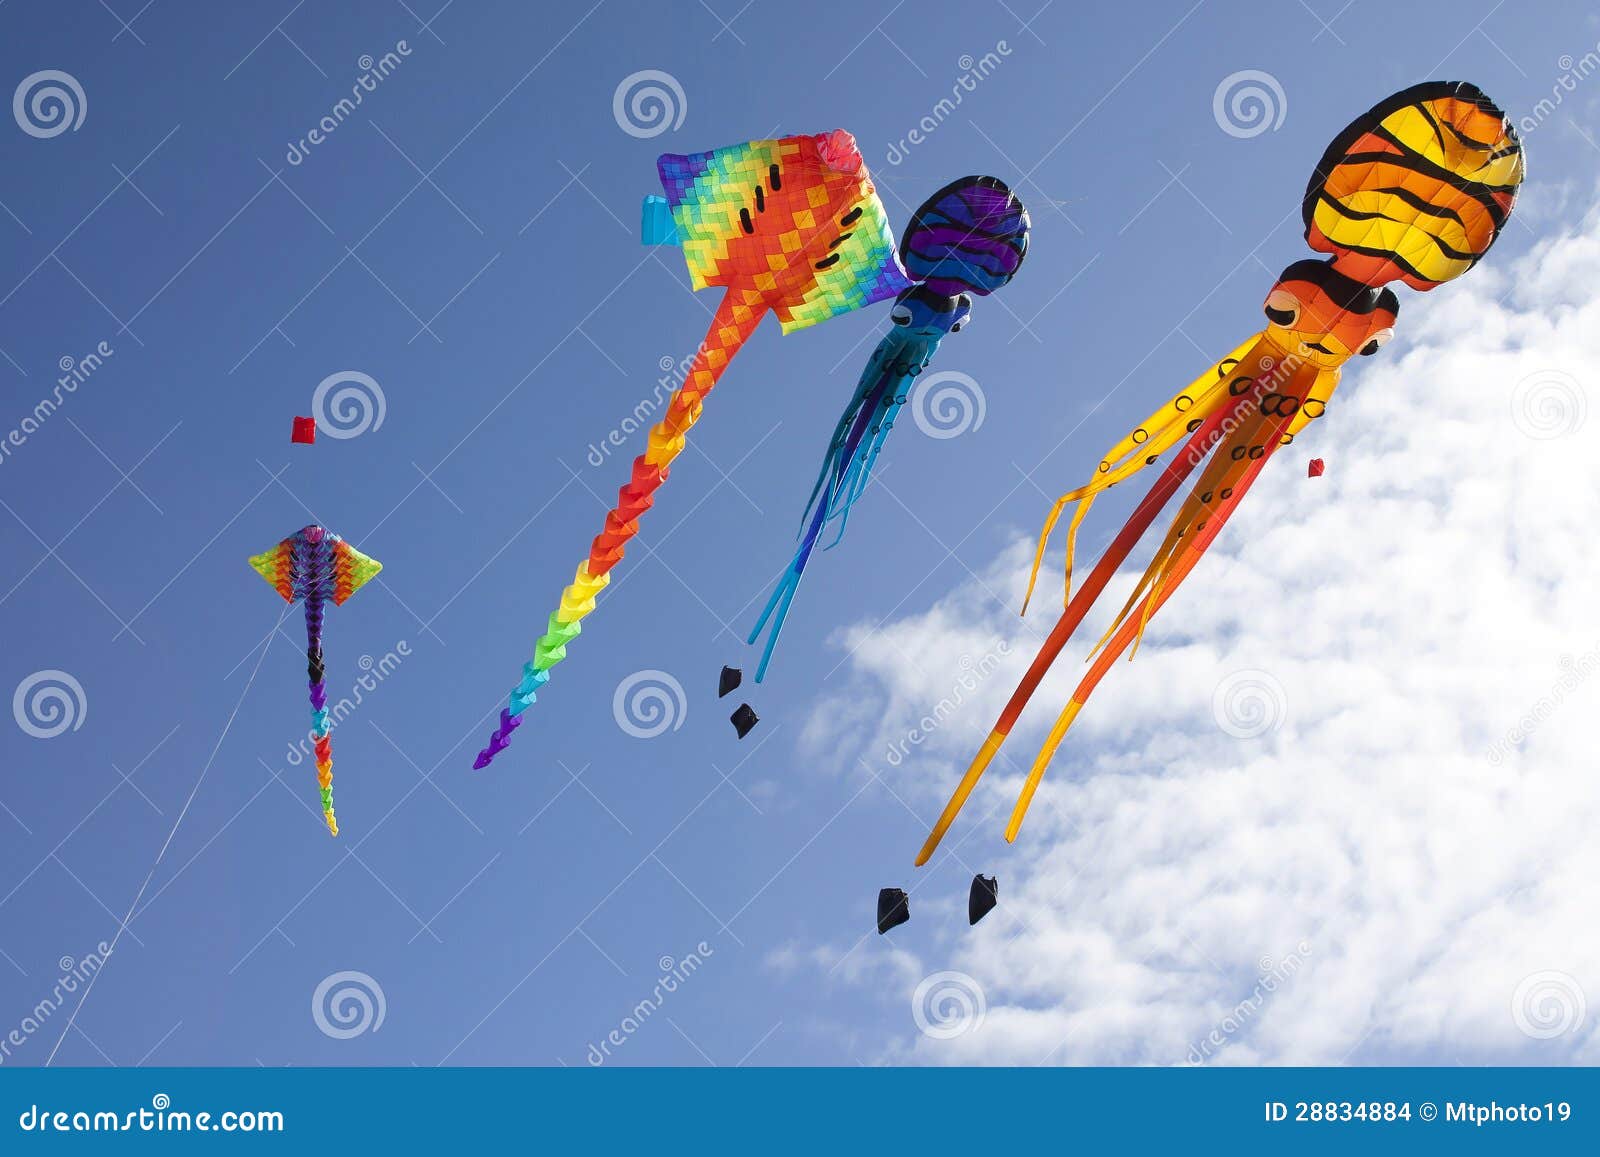 colorful flying kites against a blue sky